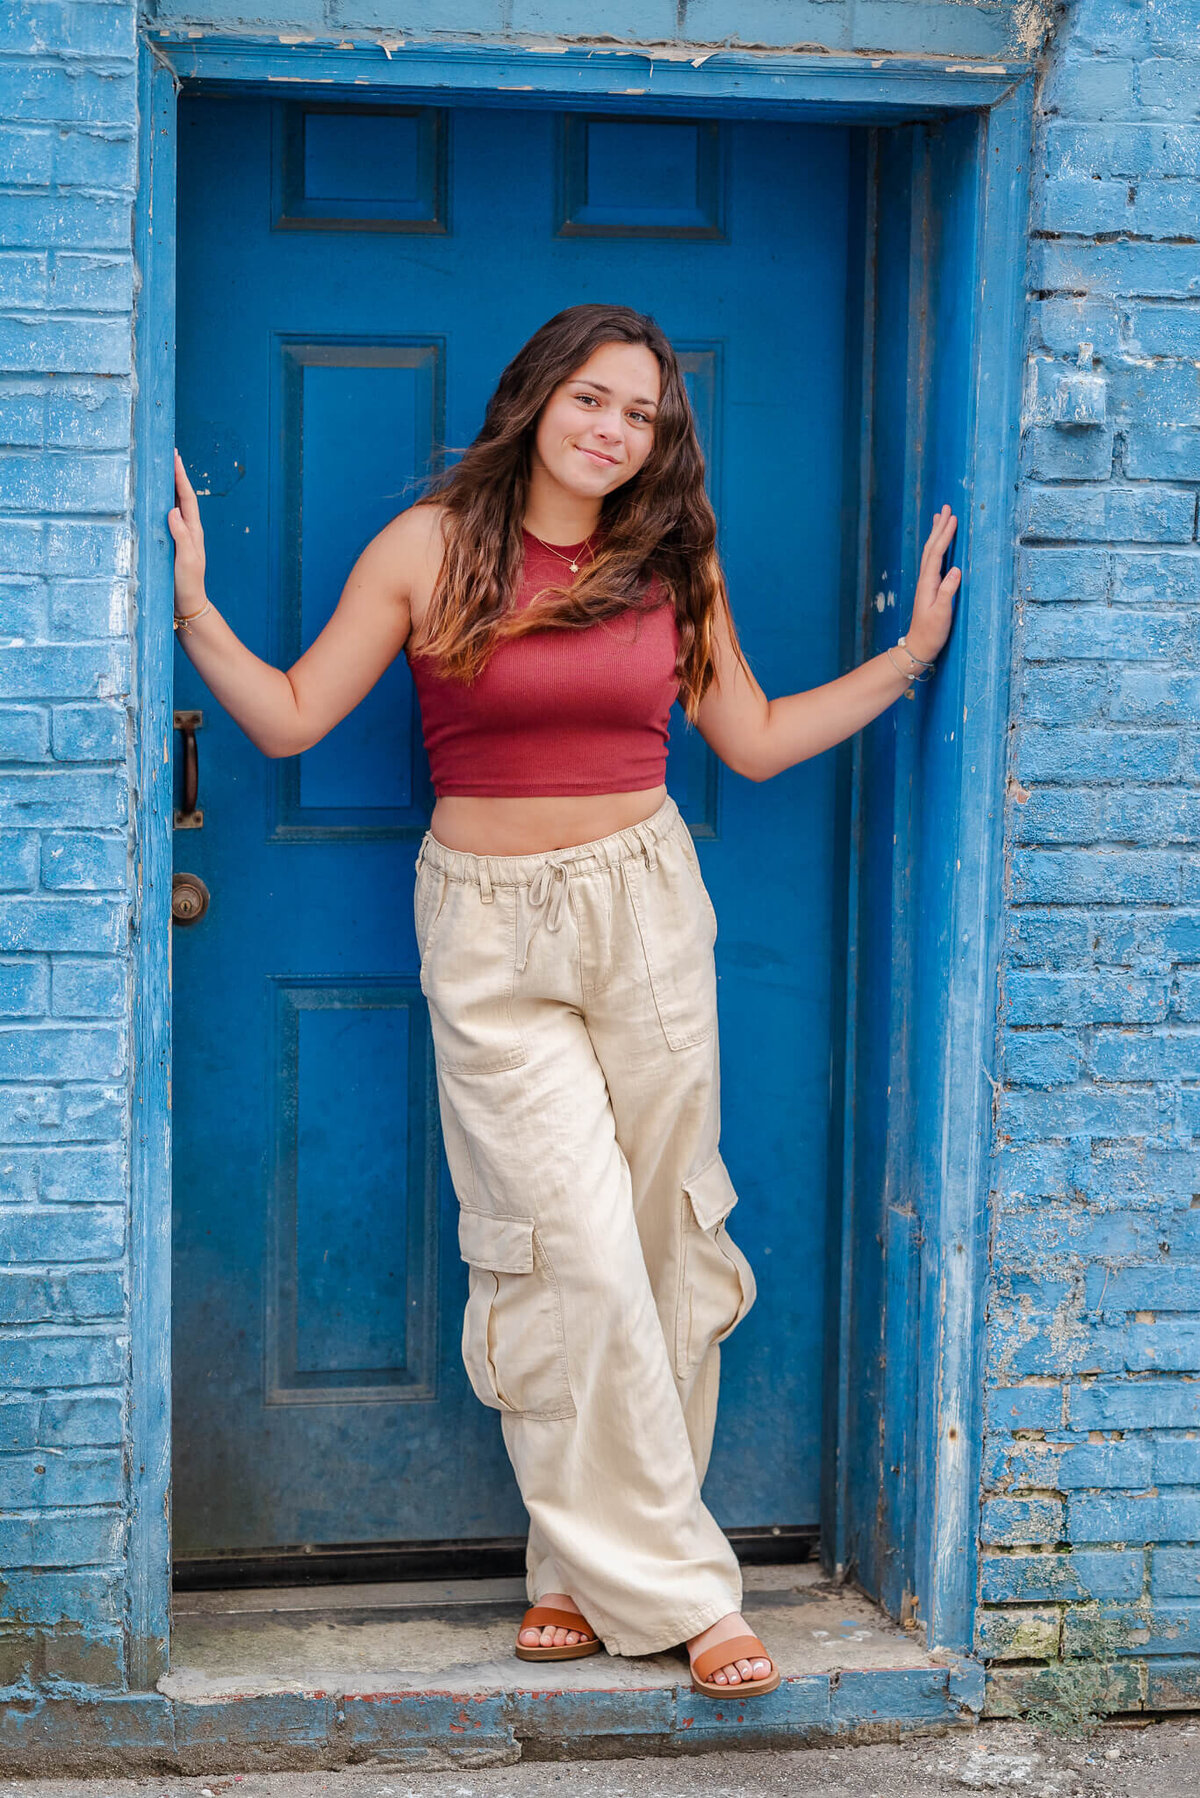 A high school senior girl with long brown hair wears khaki cargo pants and a red crop top. She is leaning in a doorway painted bright blue.